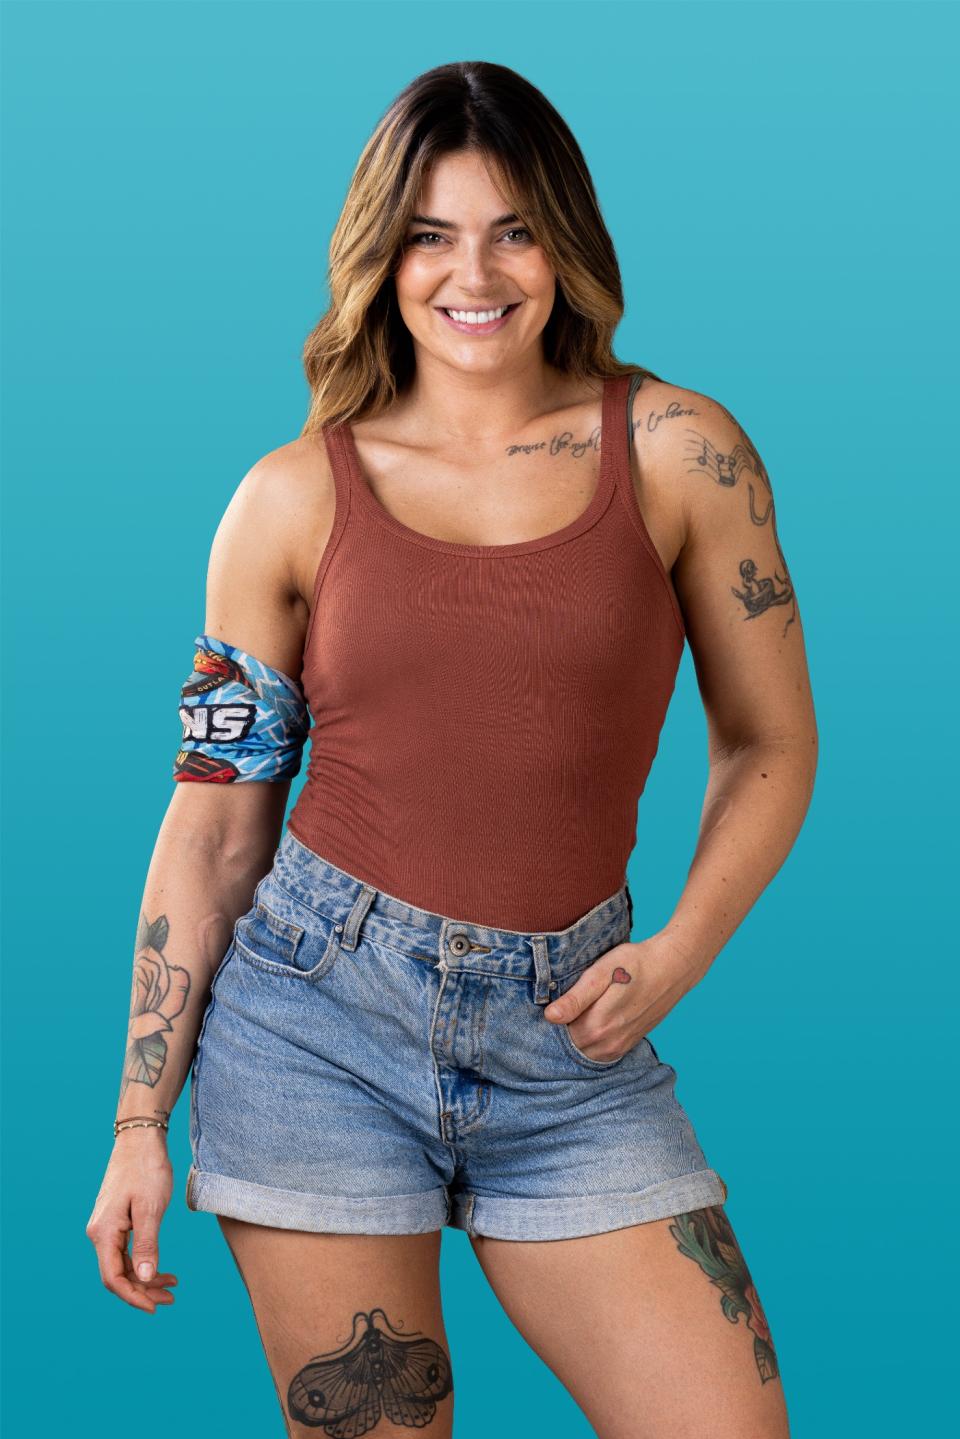 Frankie smiles at the camera in brown singlet and denim shorts.